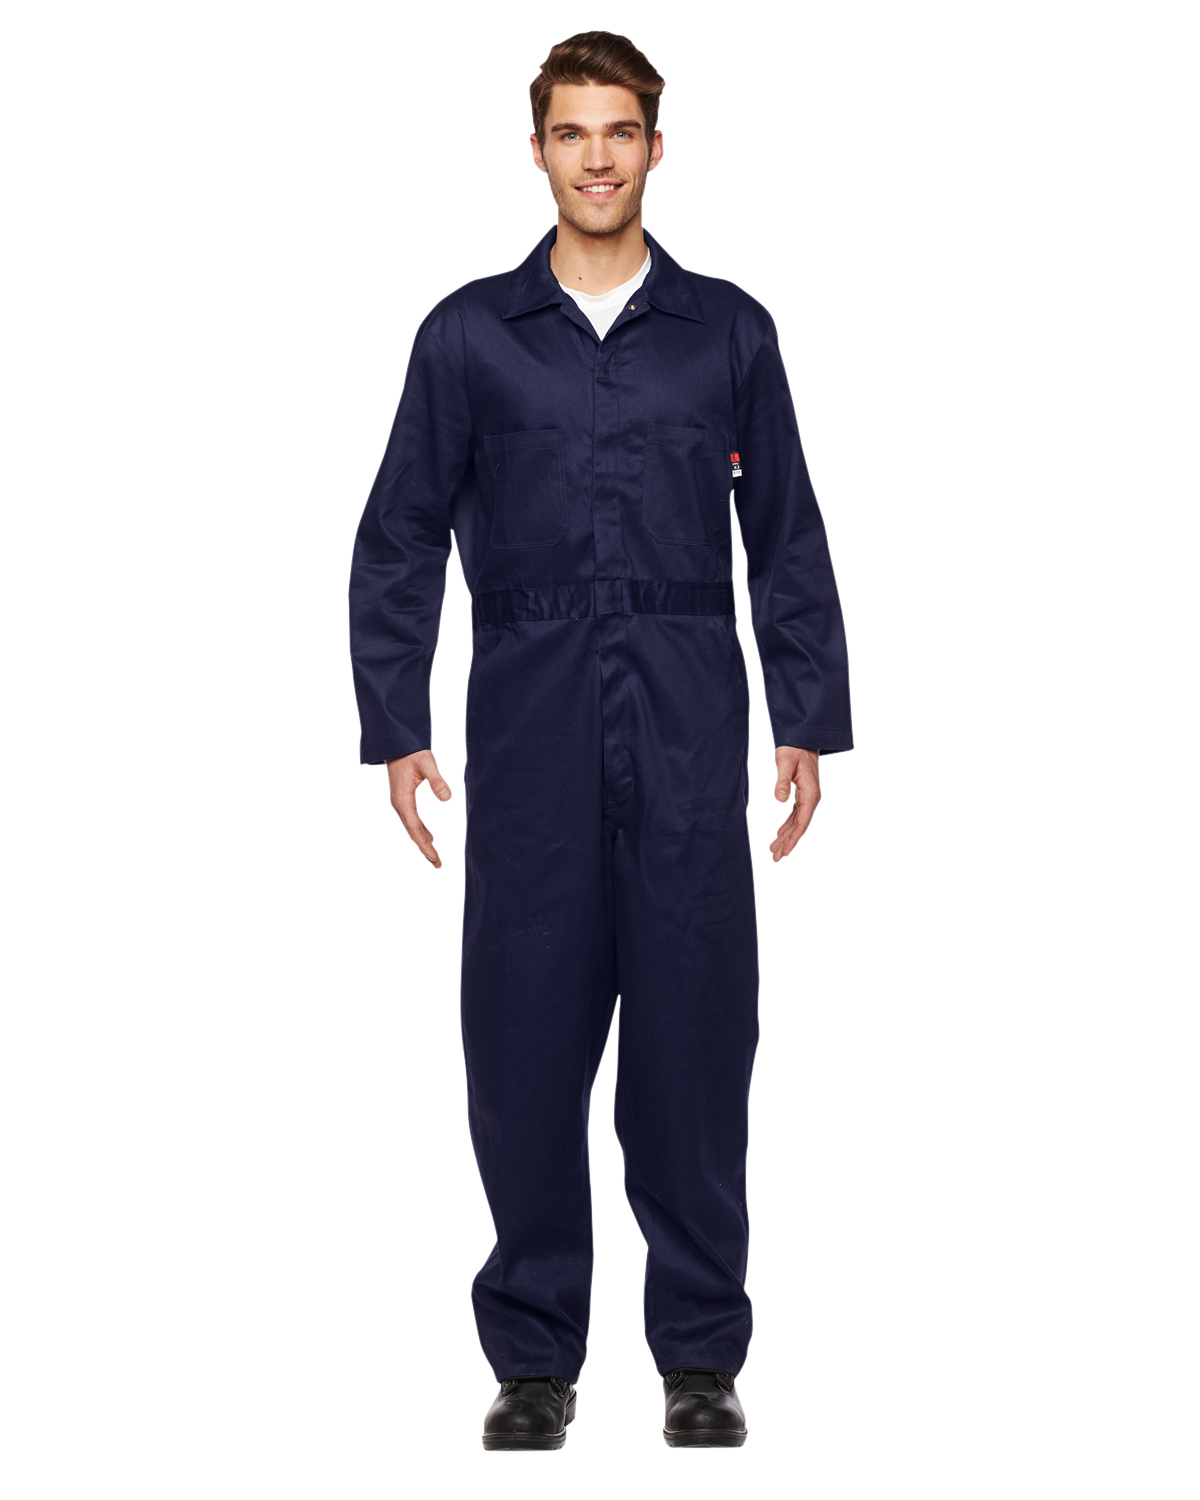 Unisex Flame-Resistant Contractor Coverall 2.0 - Tall